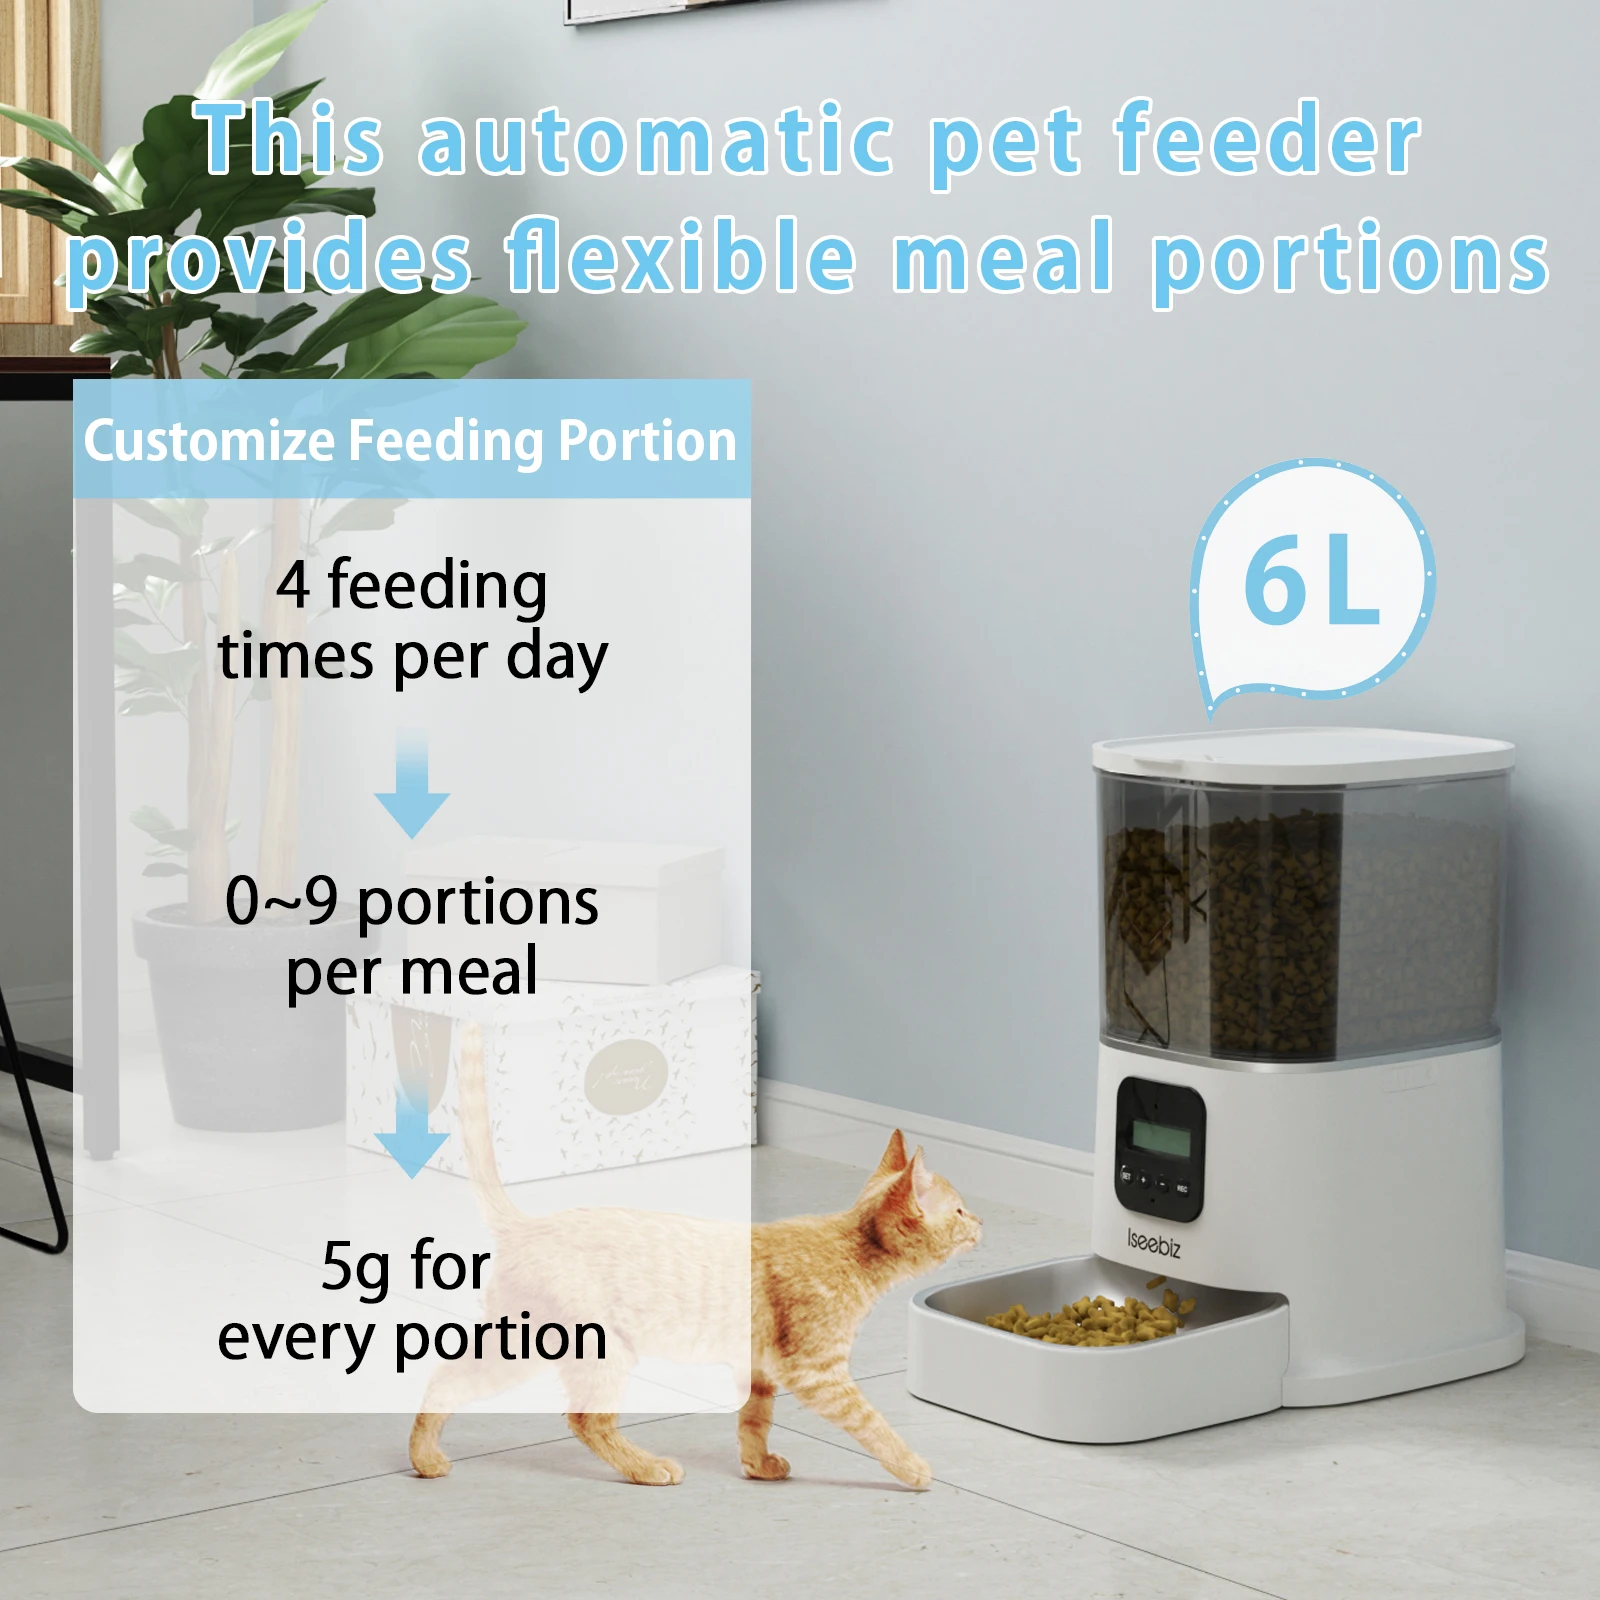 Iseebiz Automatic Feeder Large Feeders for Cats Dogs 6L Smart Dog Dispender with Camera Food Vending Machine Pet Supplies